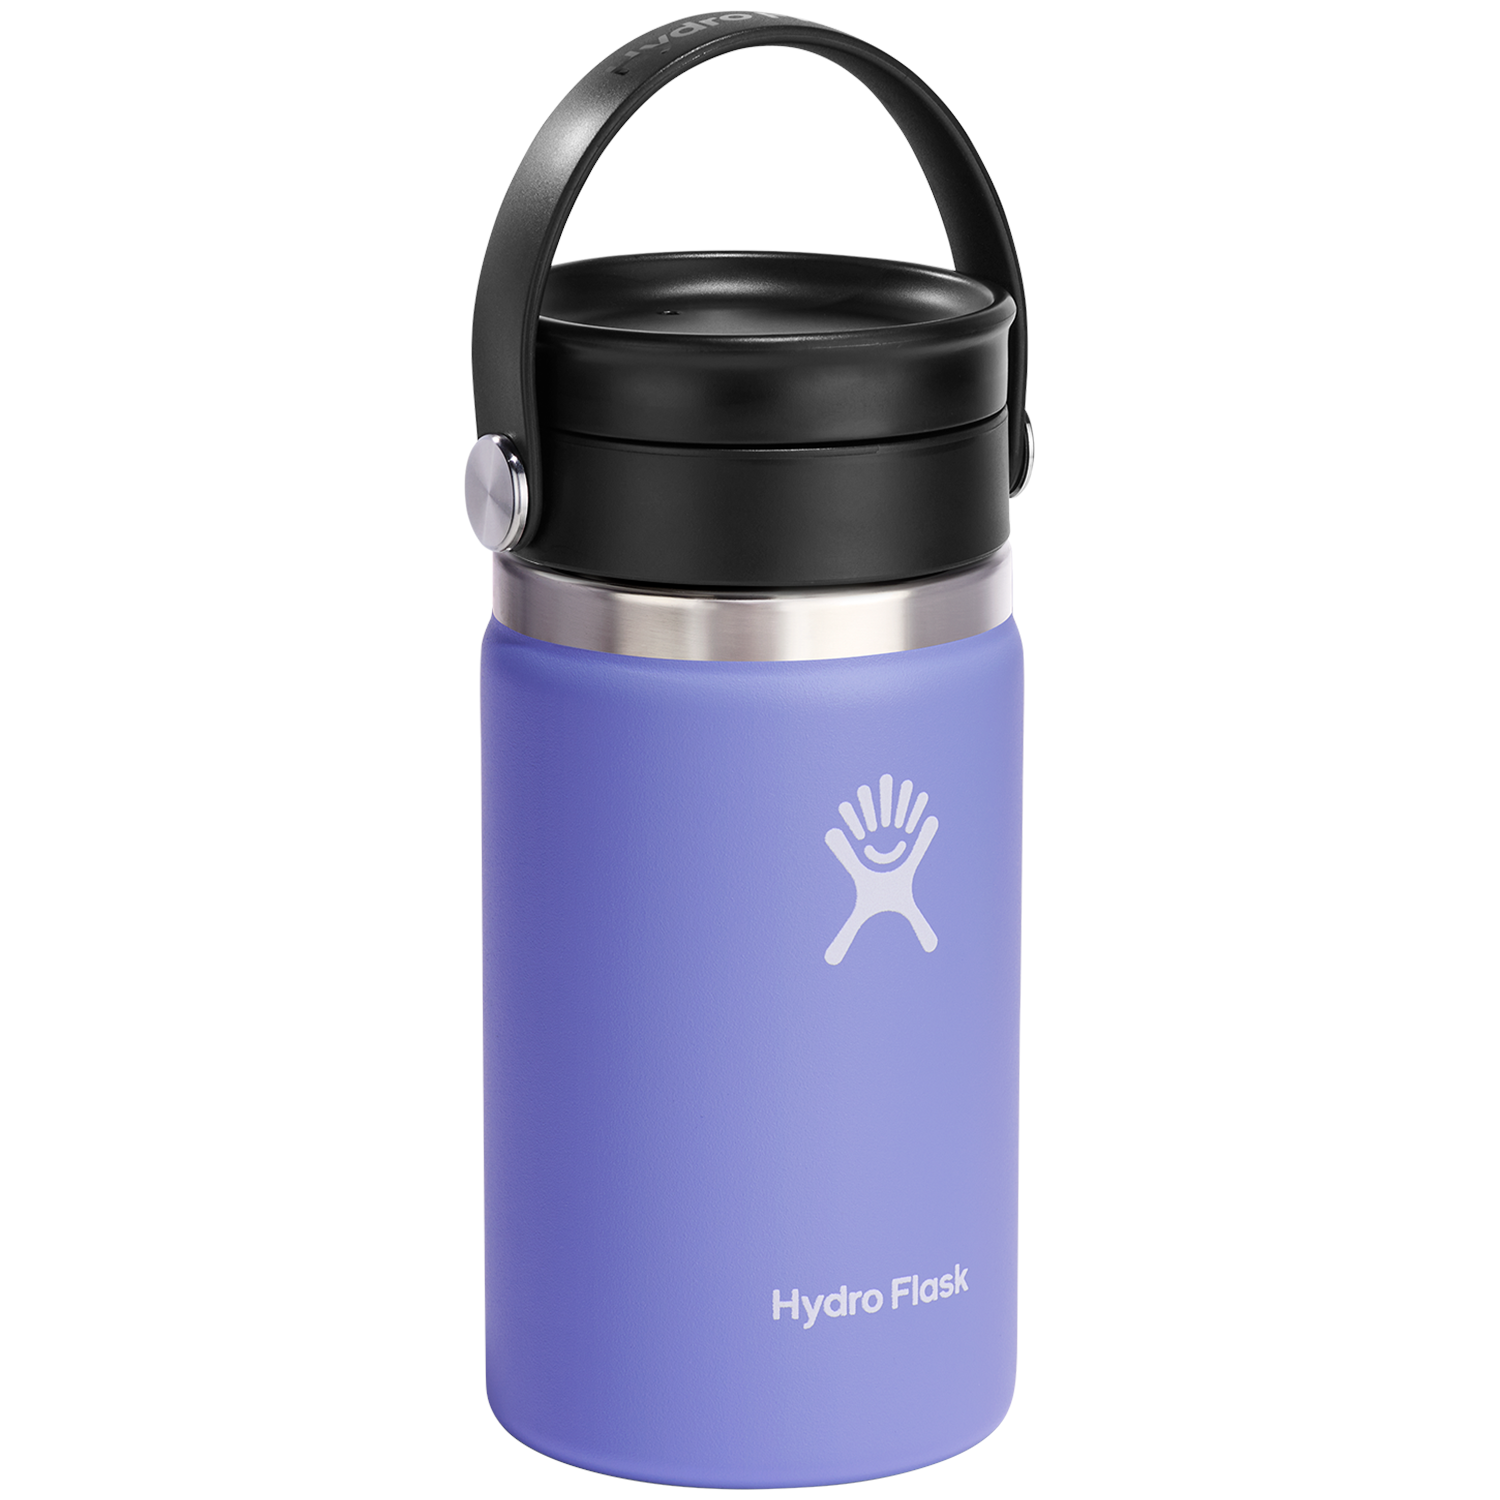 Hydro Flask 12 oz Coffee with Flex Sip Lid Review